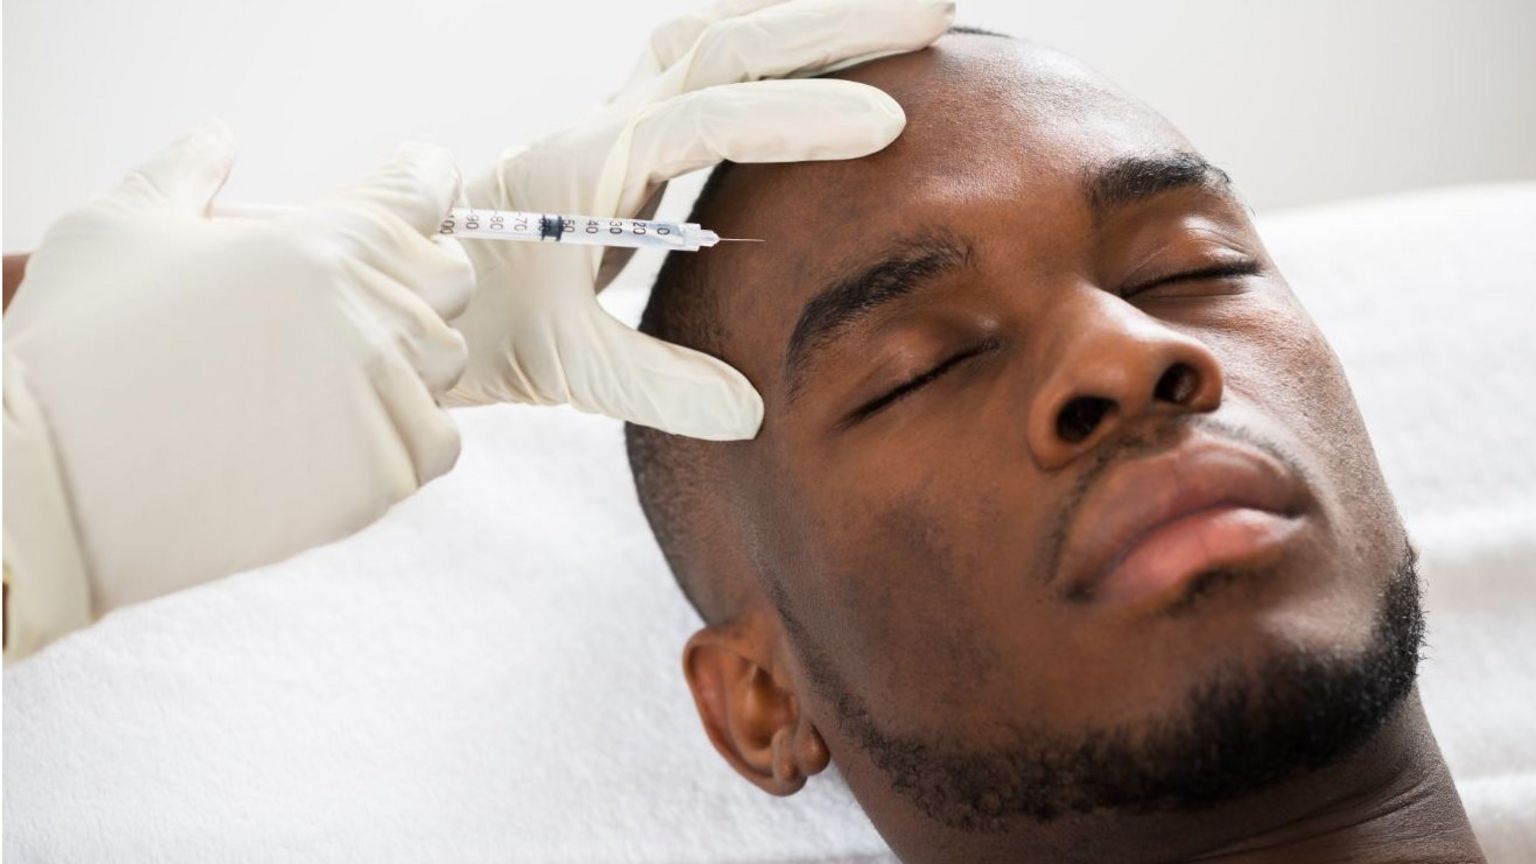 Man having forehead injected